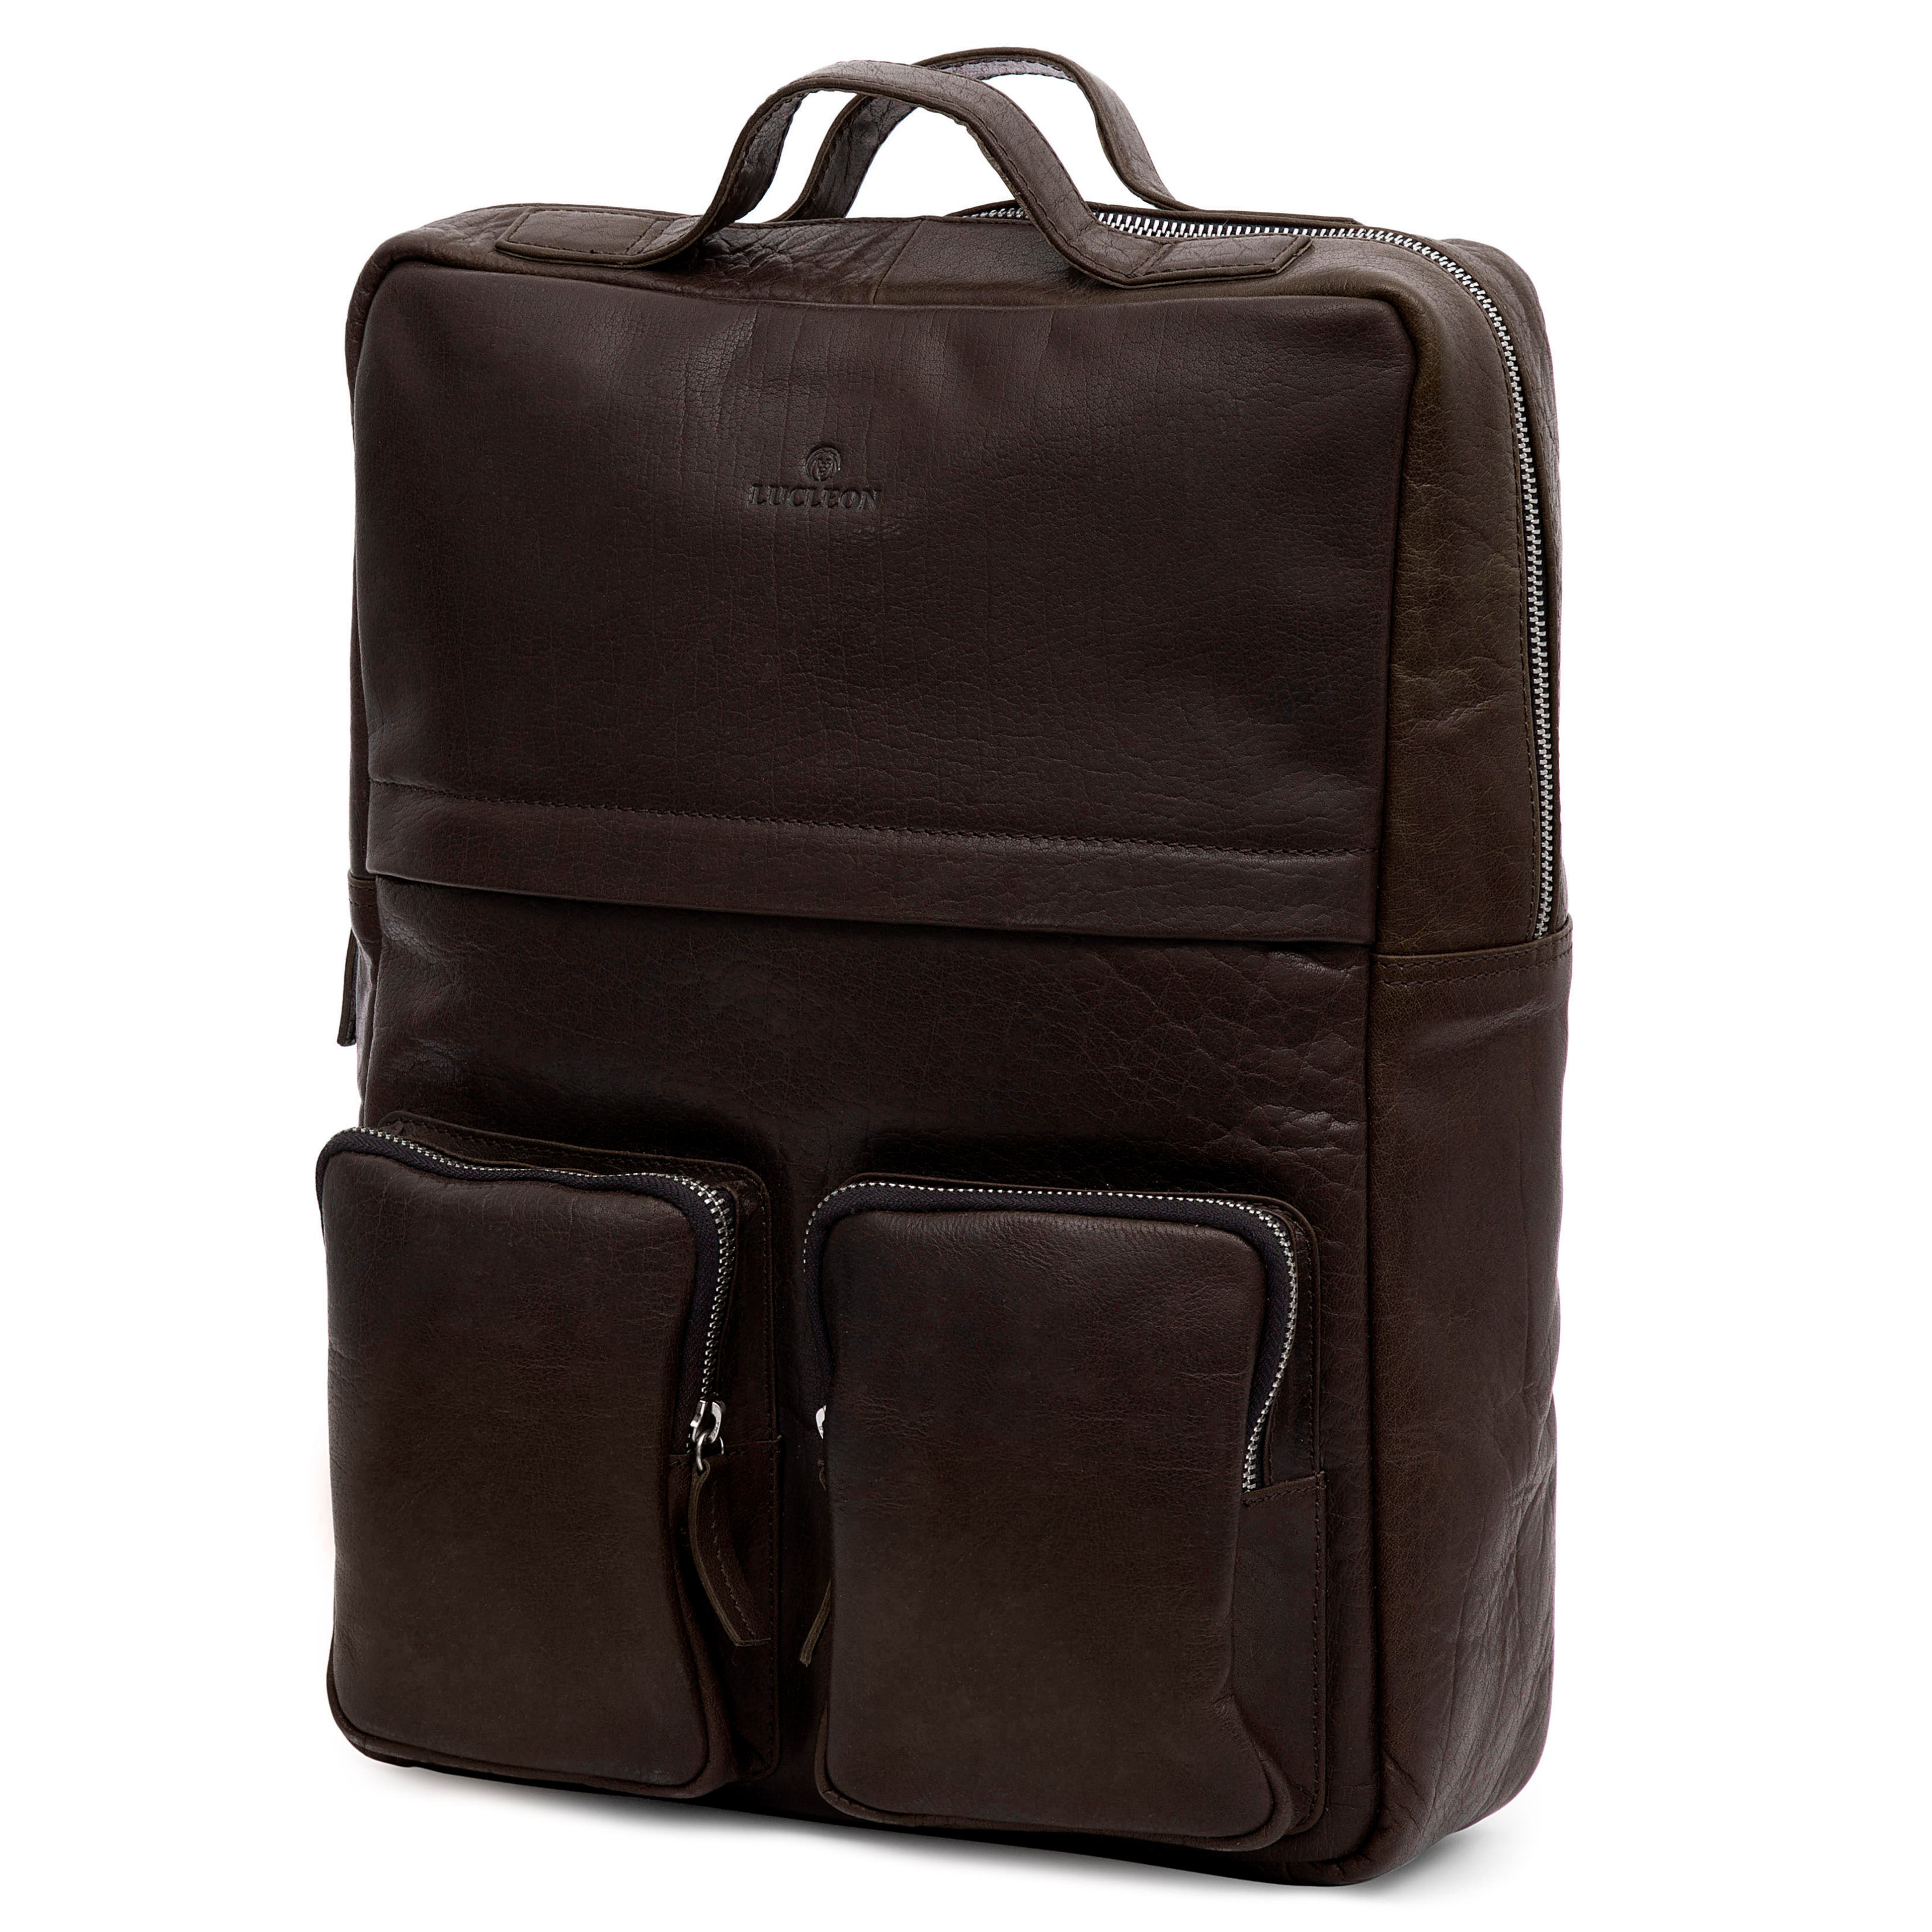 Montreal Retro Brown Leather Backpack